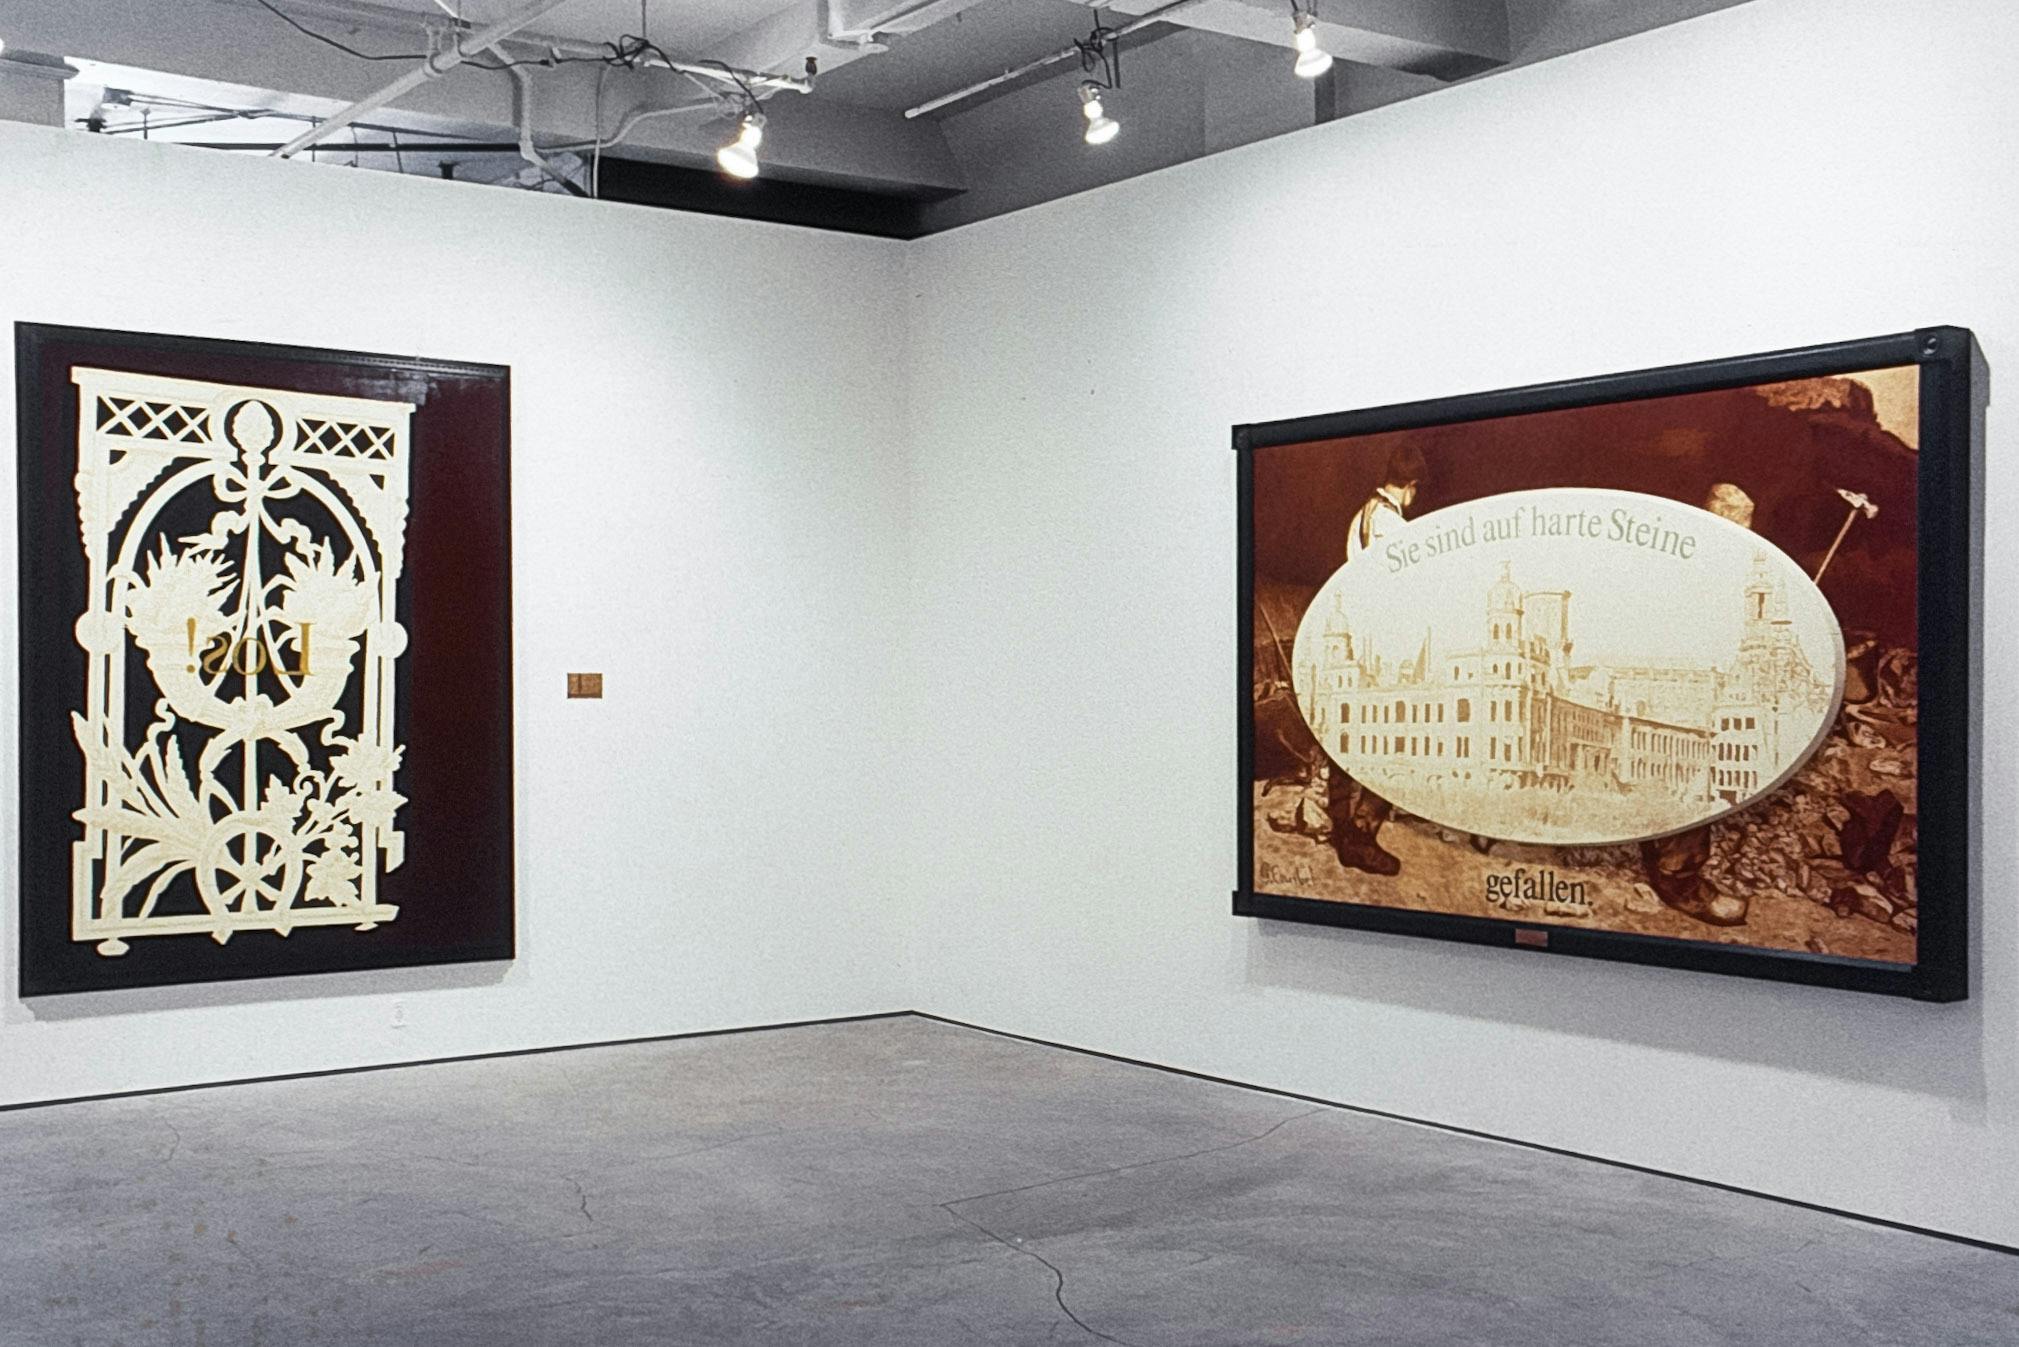 2 large paintings in the corner of a gallery. The one on the left shows an ornate gate pattern and backwards yellow text reading "Los!" The one on the right shows a building, workers, and German text.